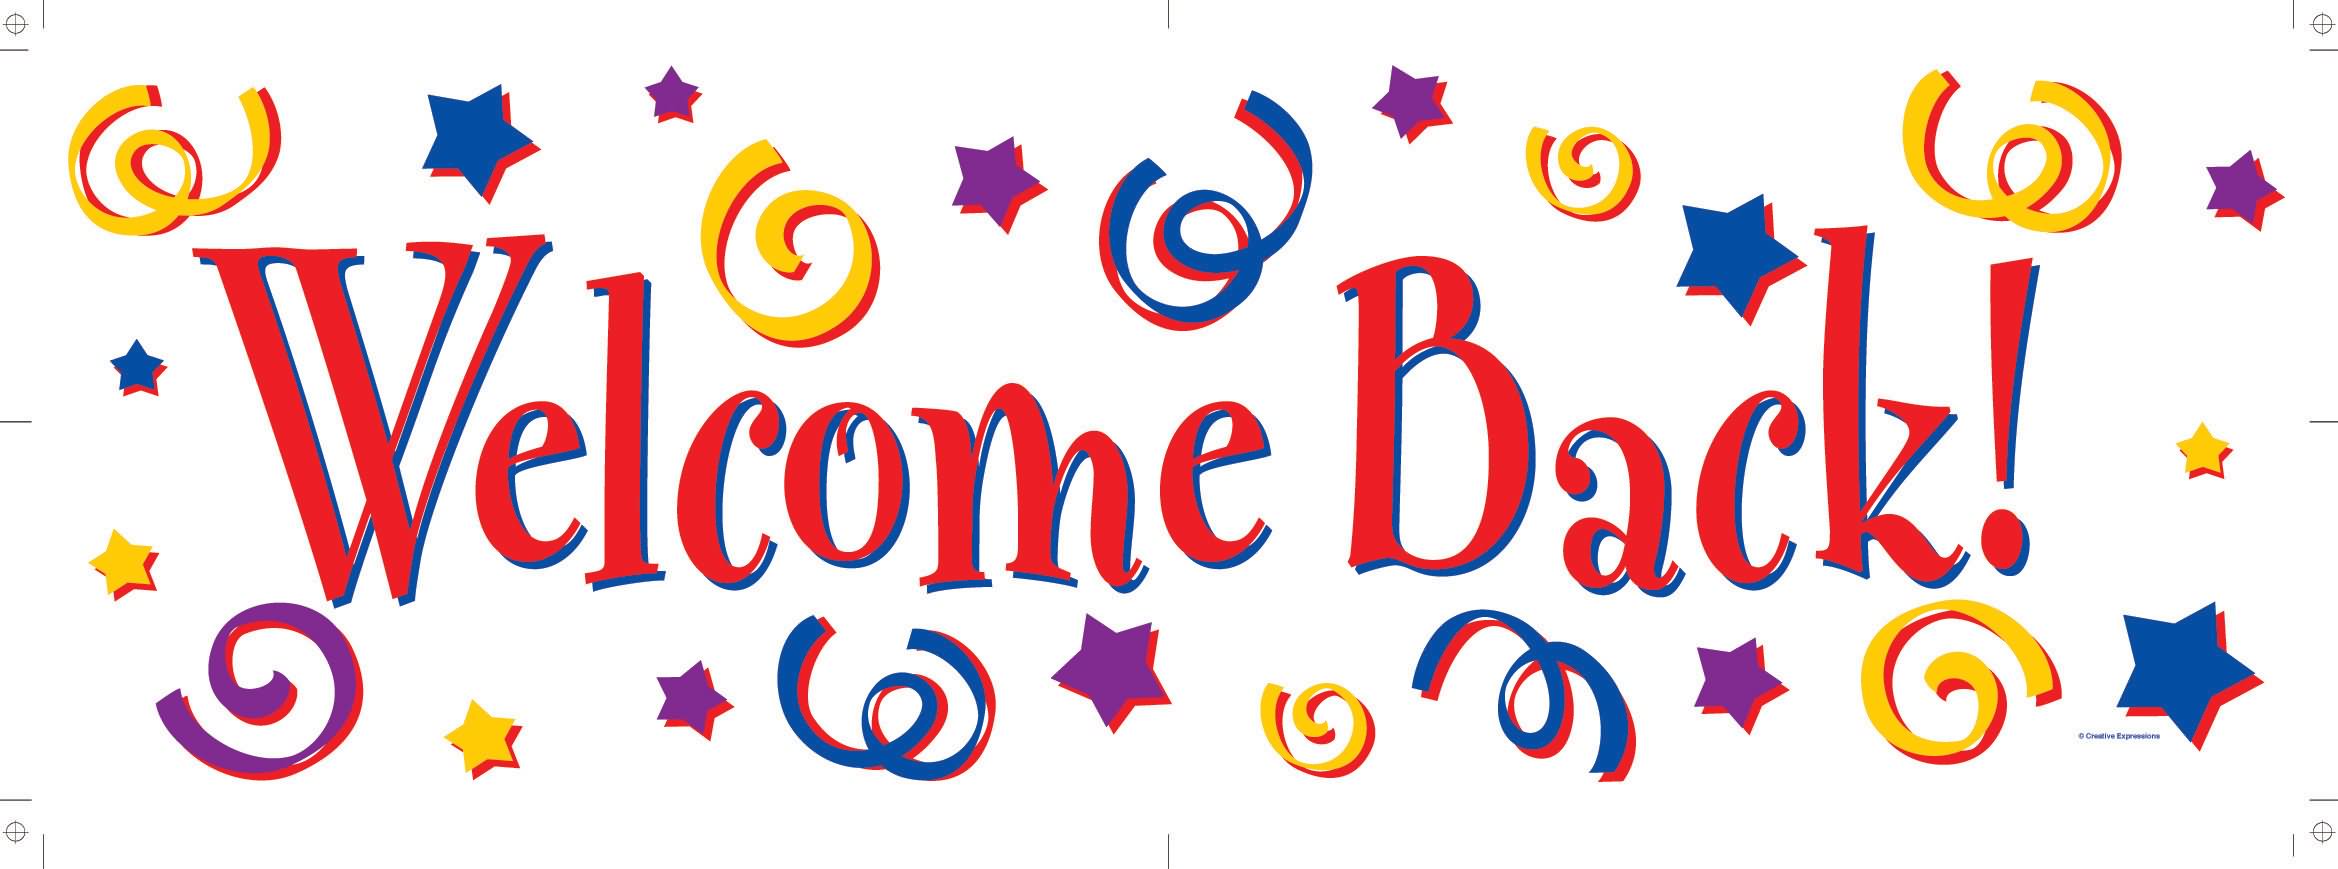 welcome back to school clipar - Welcome Back To School Clip Art